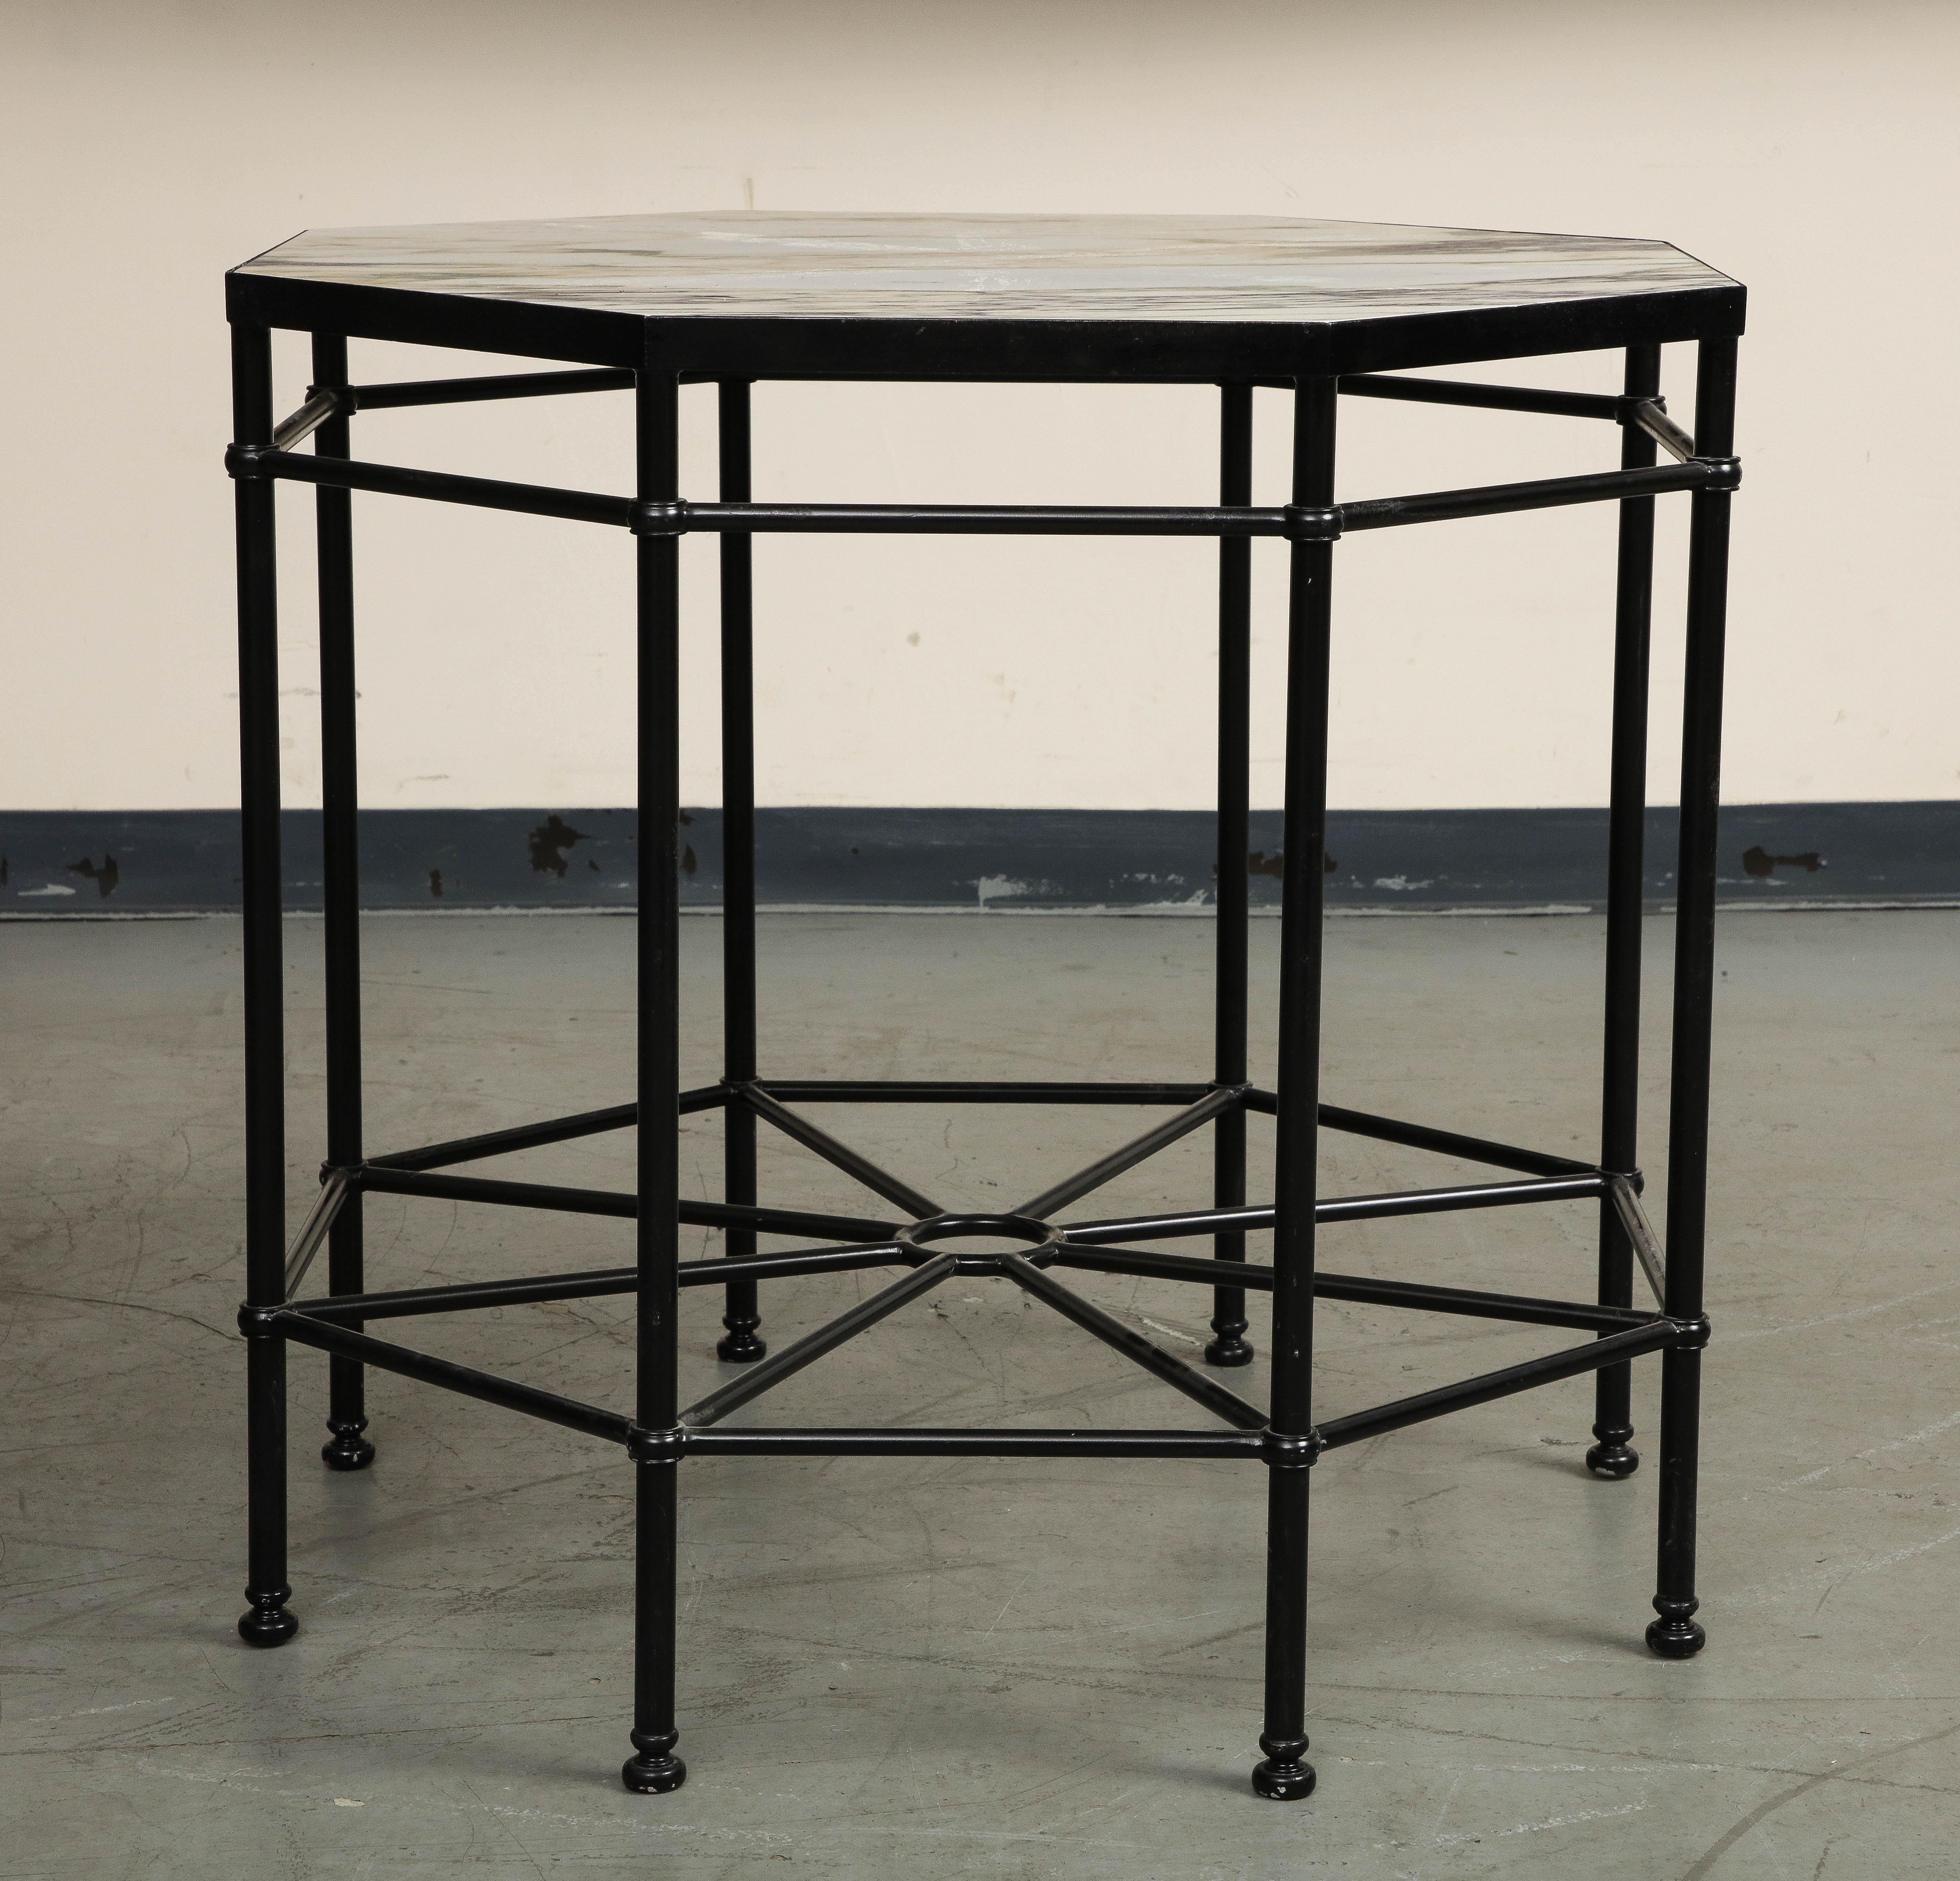 20th Century octagonal center table with a base of black painted steel and marble top, in the style of Theodore Alexander. Base stretchers meet with a spoke-and-wheel design. New inset top of Violetta marble custom made in 2022. 


